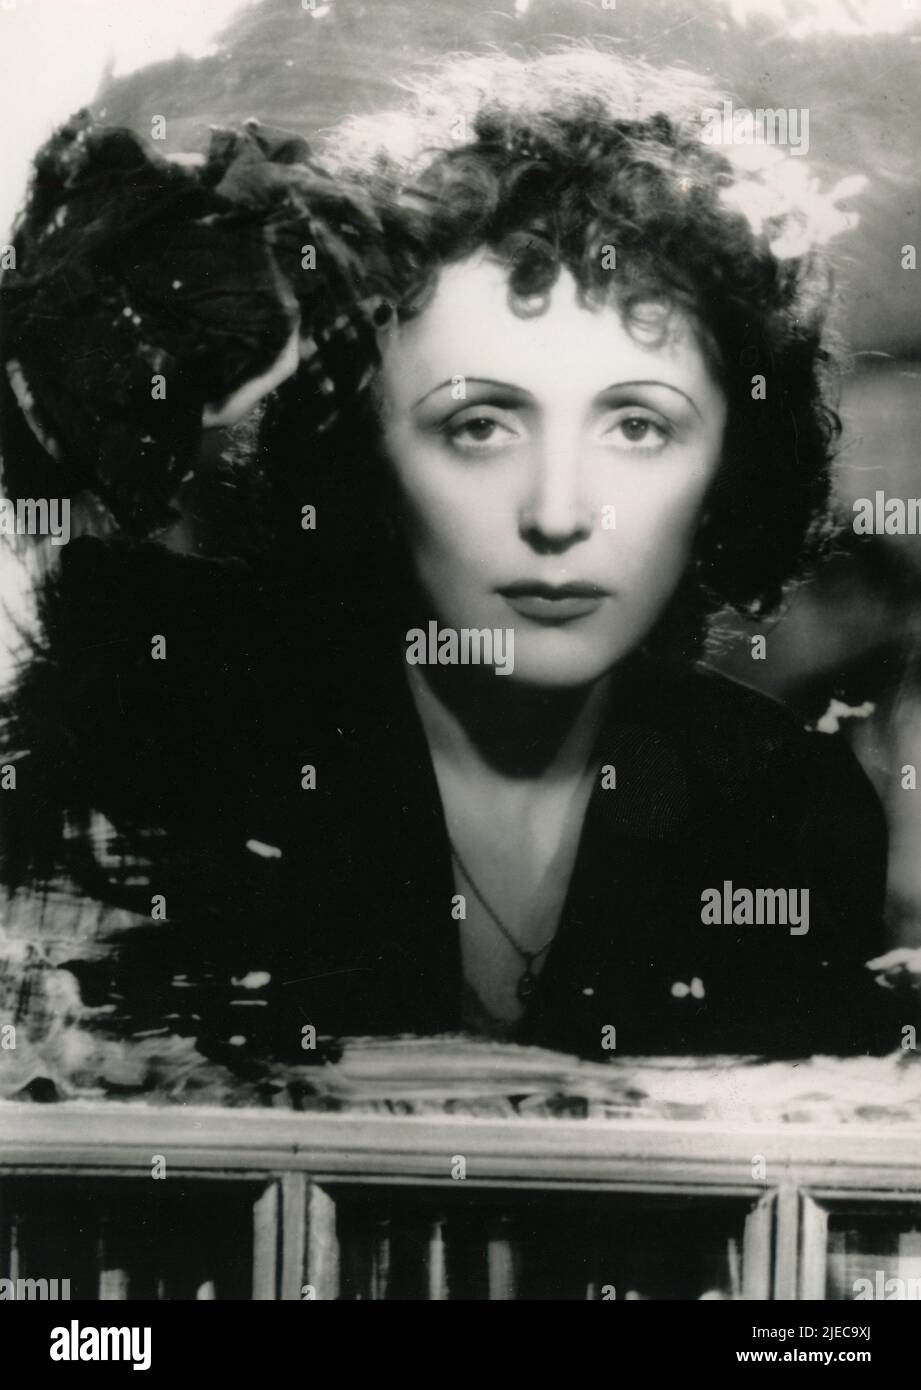 Attrice e cantante francese Edith Piaf nel film Star Without Light (Etoile sans lumiere), Francia 1946 Foto Stock